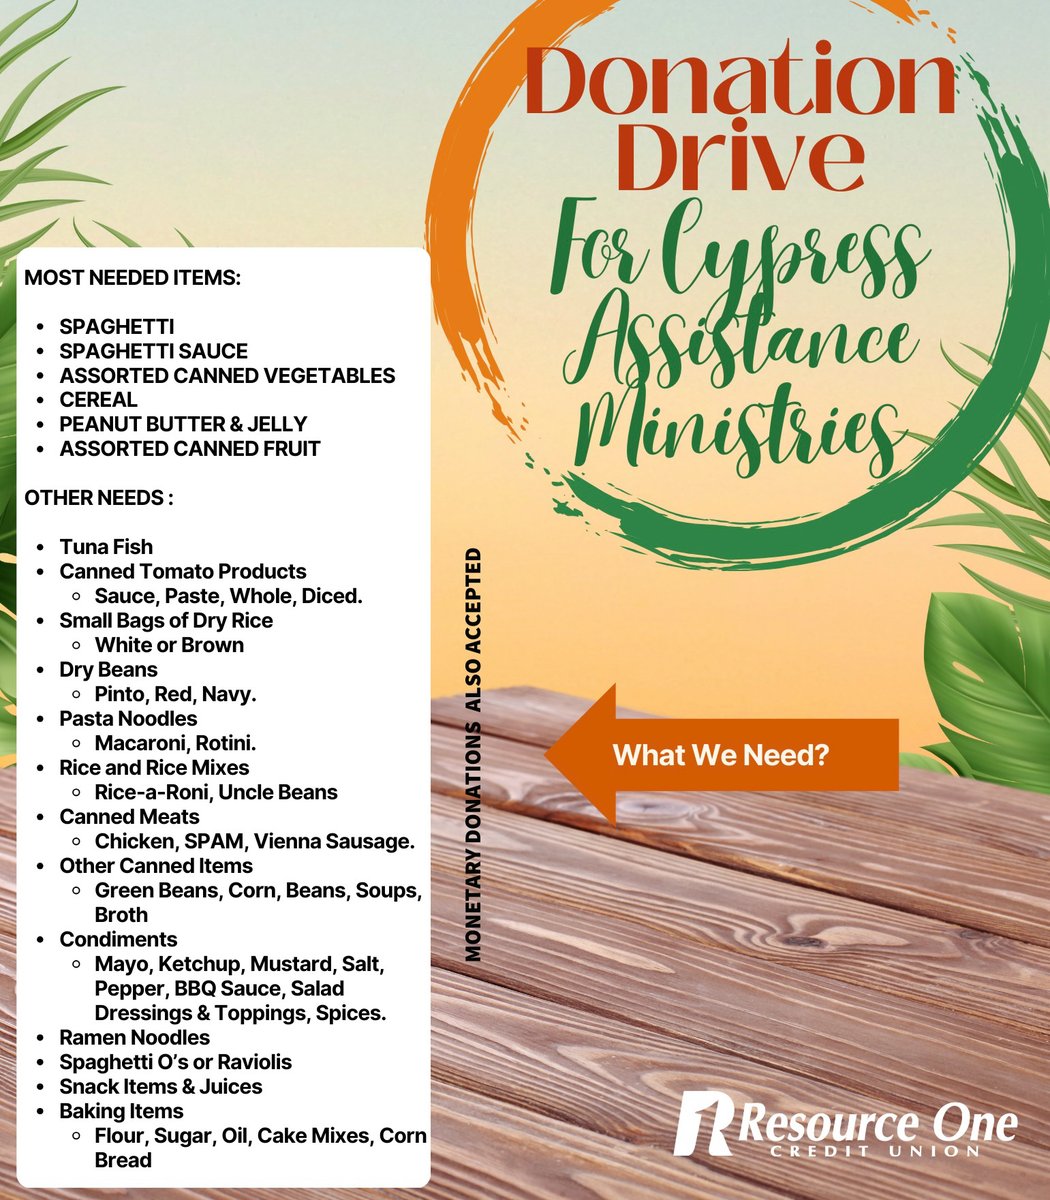 Join us in spreading kindness and compassion through our Cypress Assistance Ministries donation drive! Today’s the last day to donate.  Come see us at one of our Houston branches and donate. #R1CU